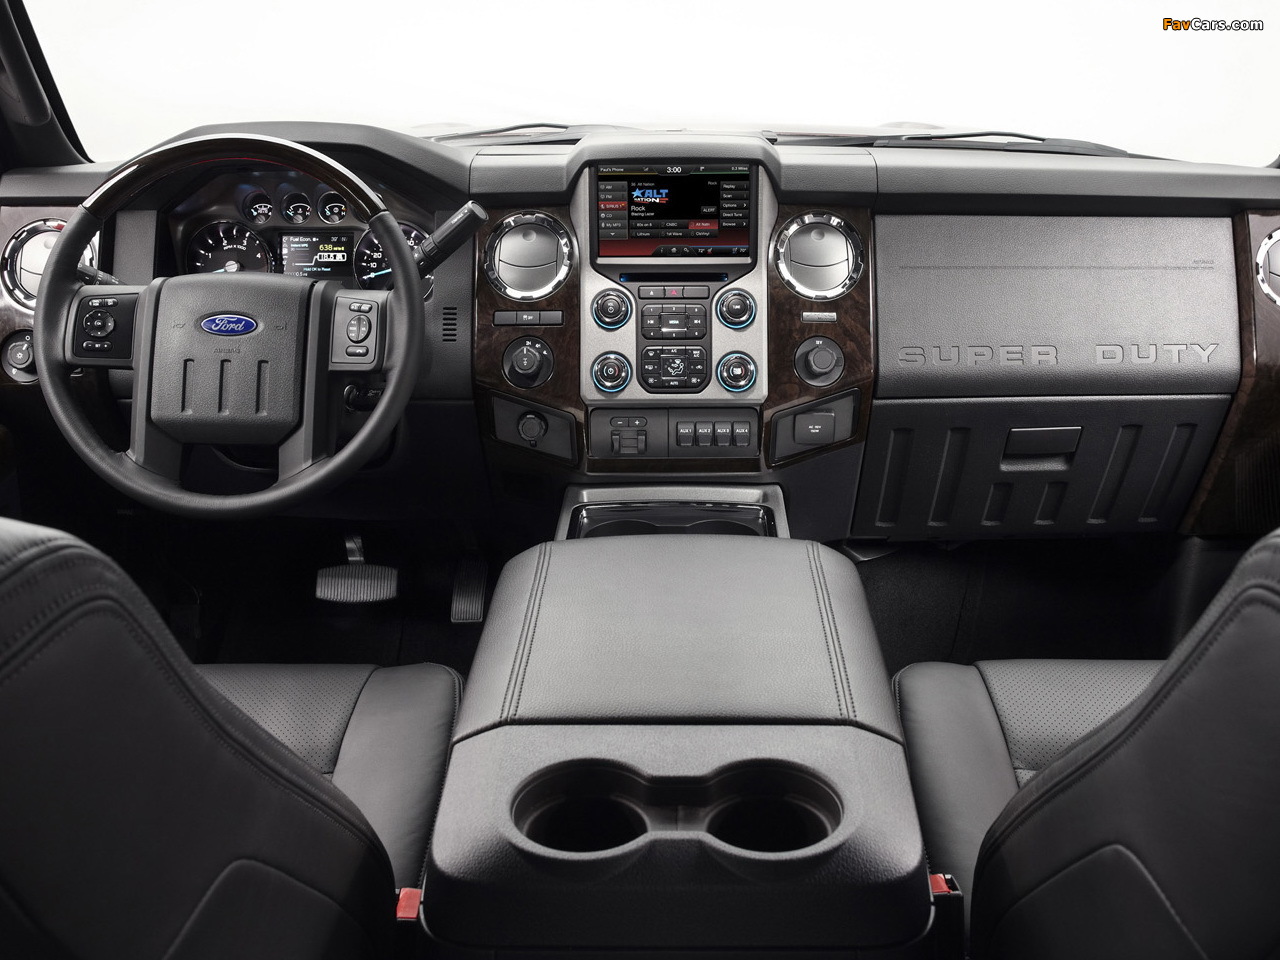 Ford F-450 Super Duty 2010 images (1280 x 960)